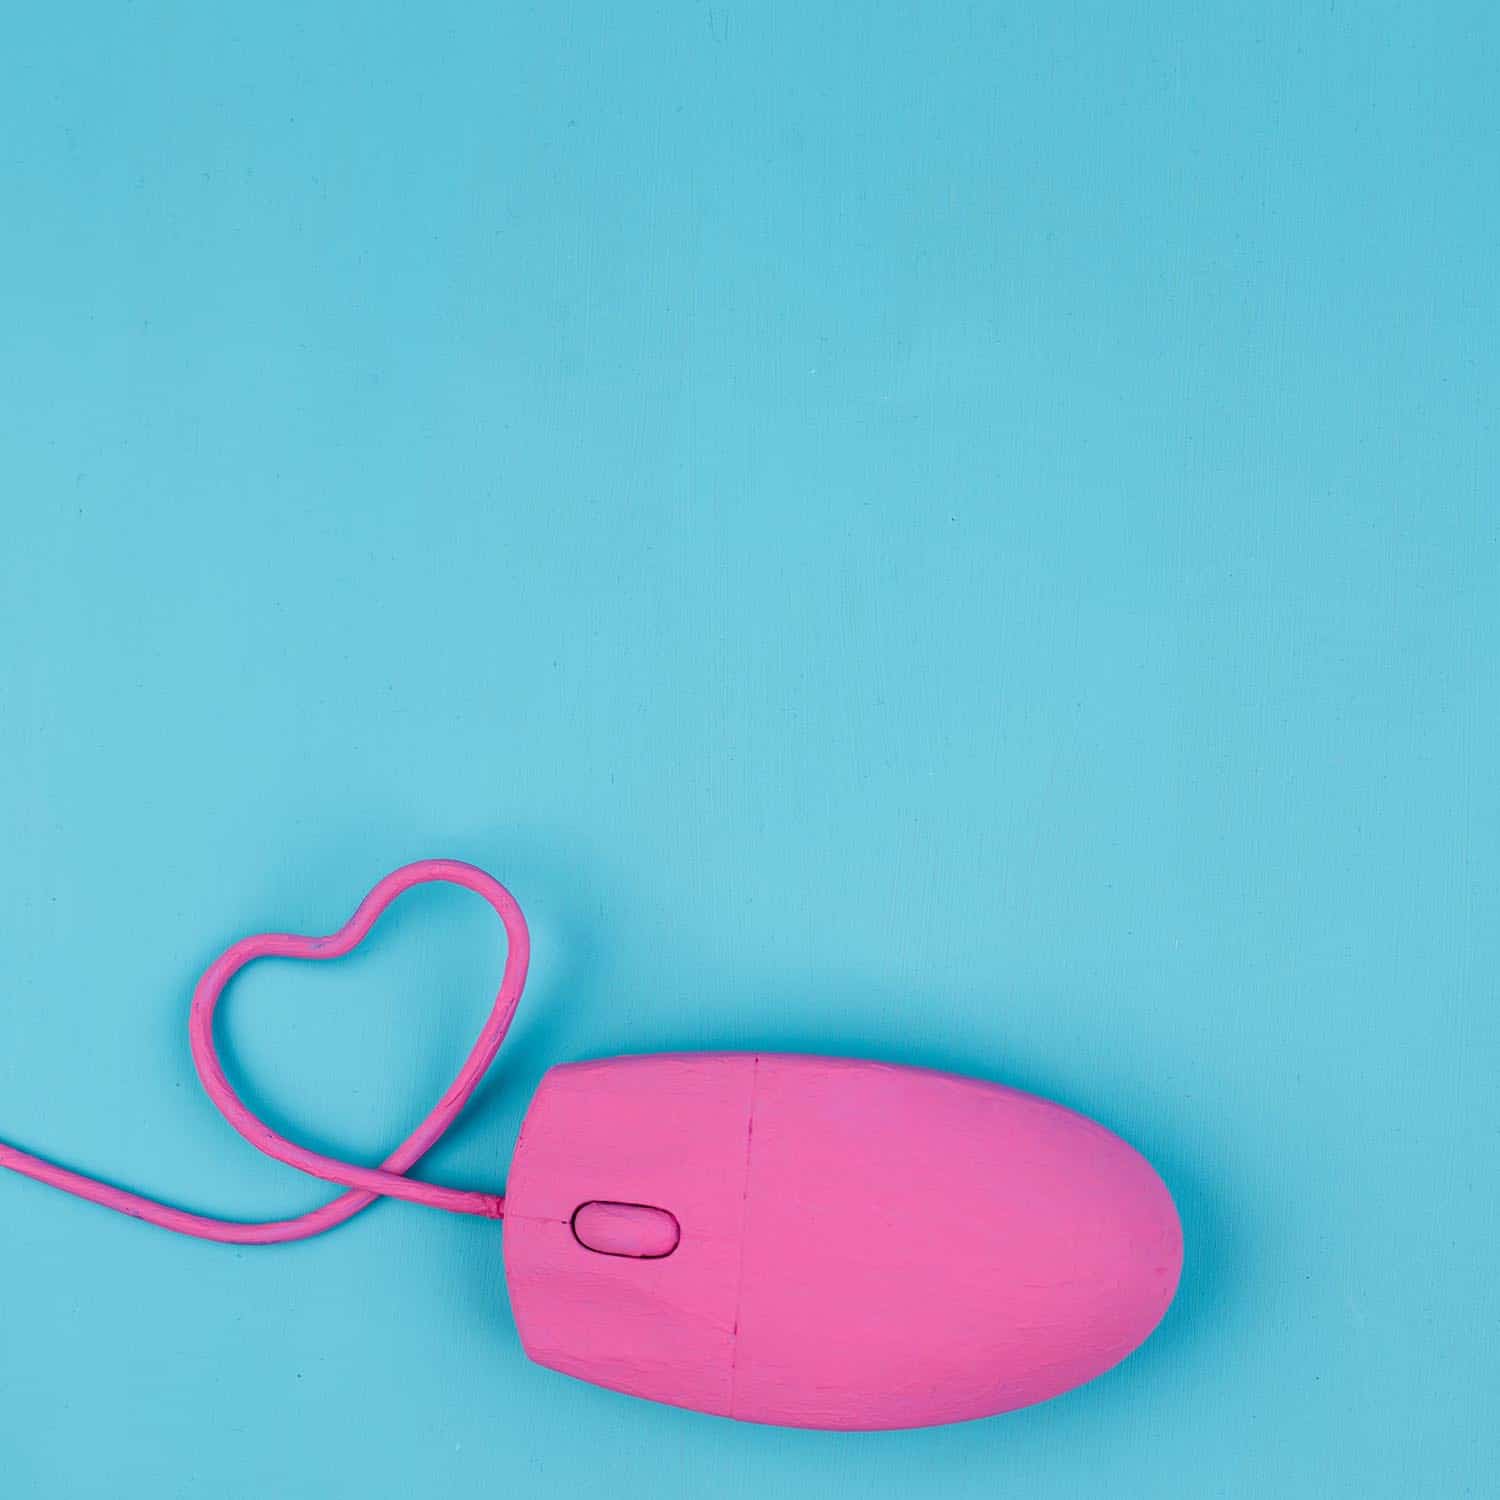 A pink mouse on a blue background